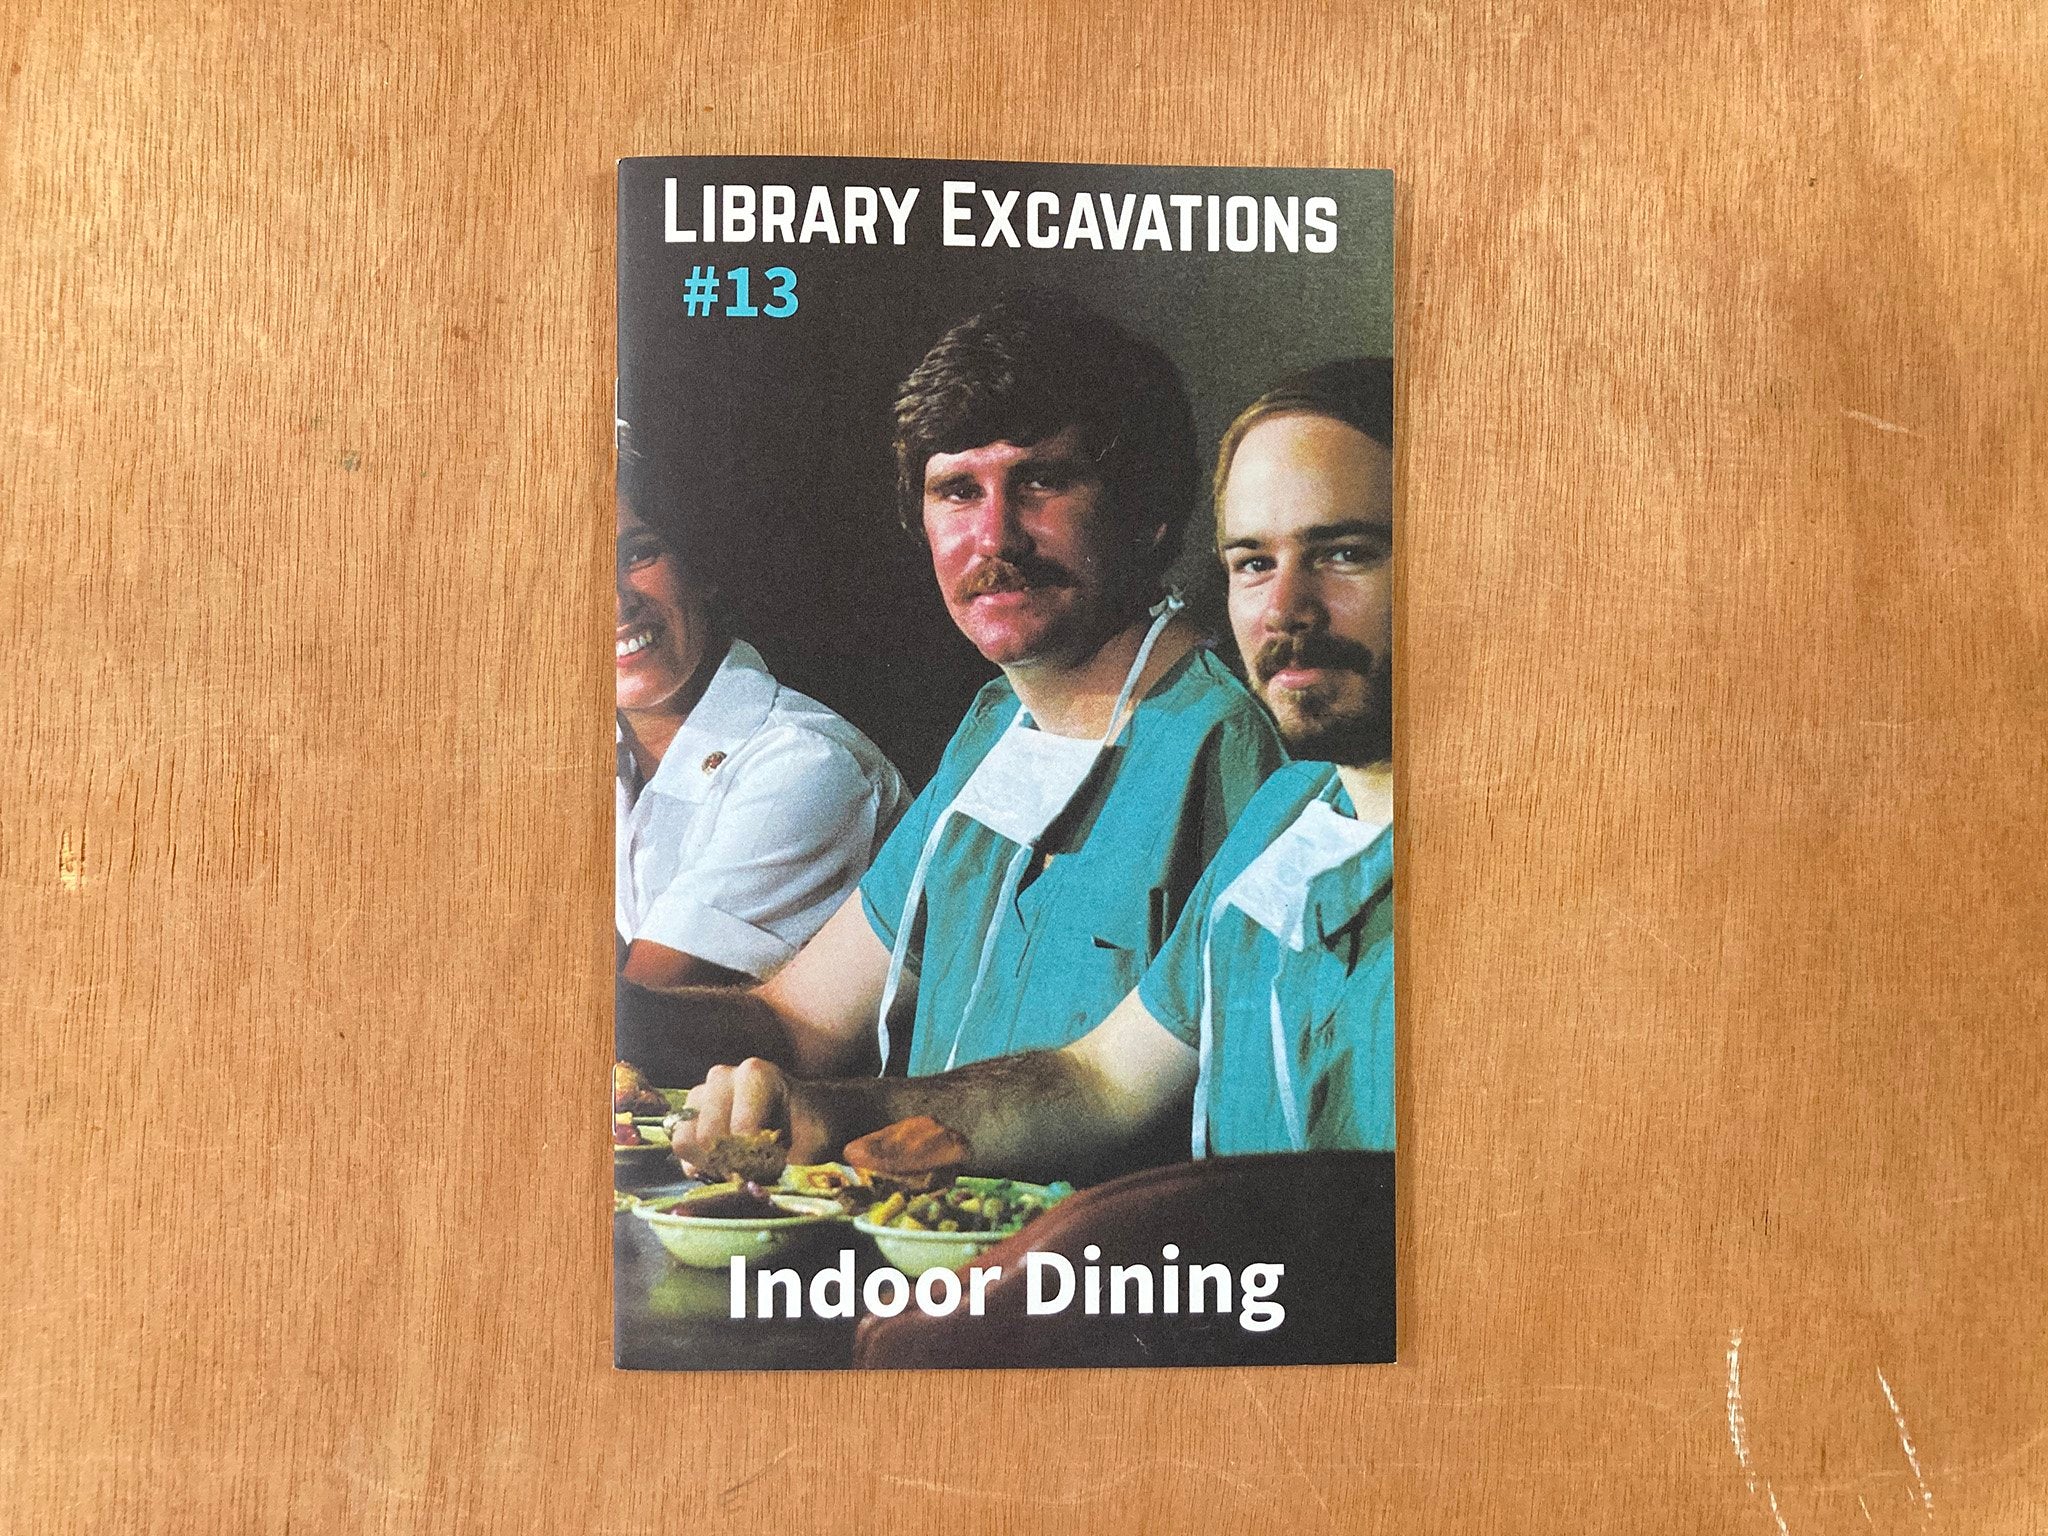 LIBRARY EXCAVATIONS #13: INDOOR DINING by Marc Fischer and Public Collectors